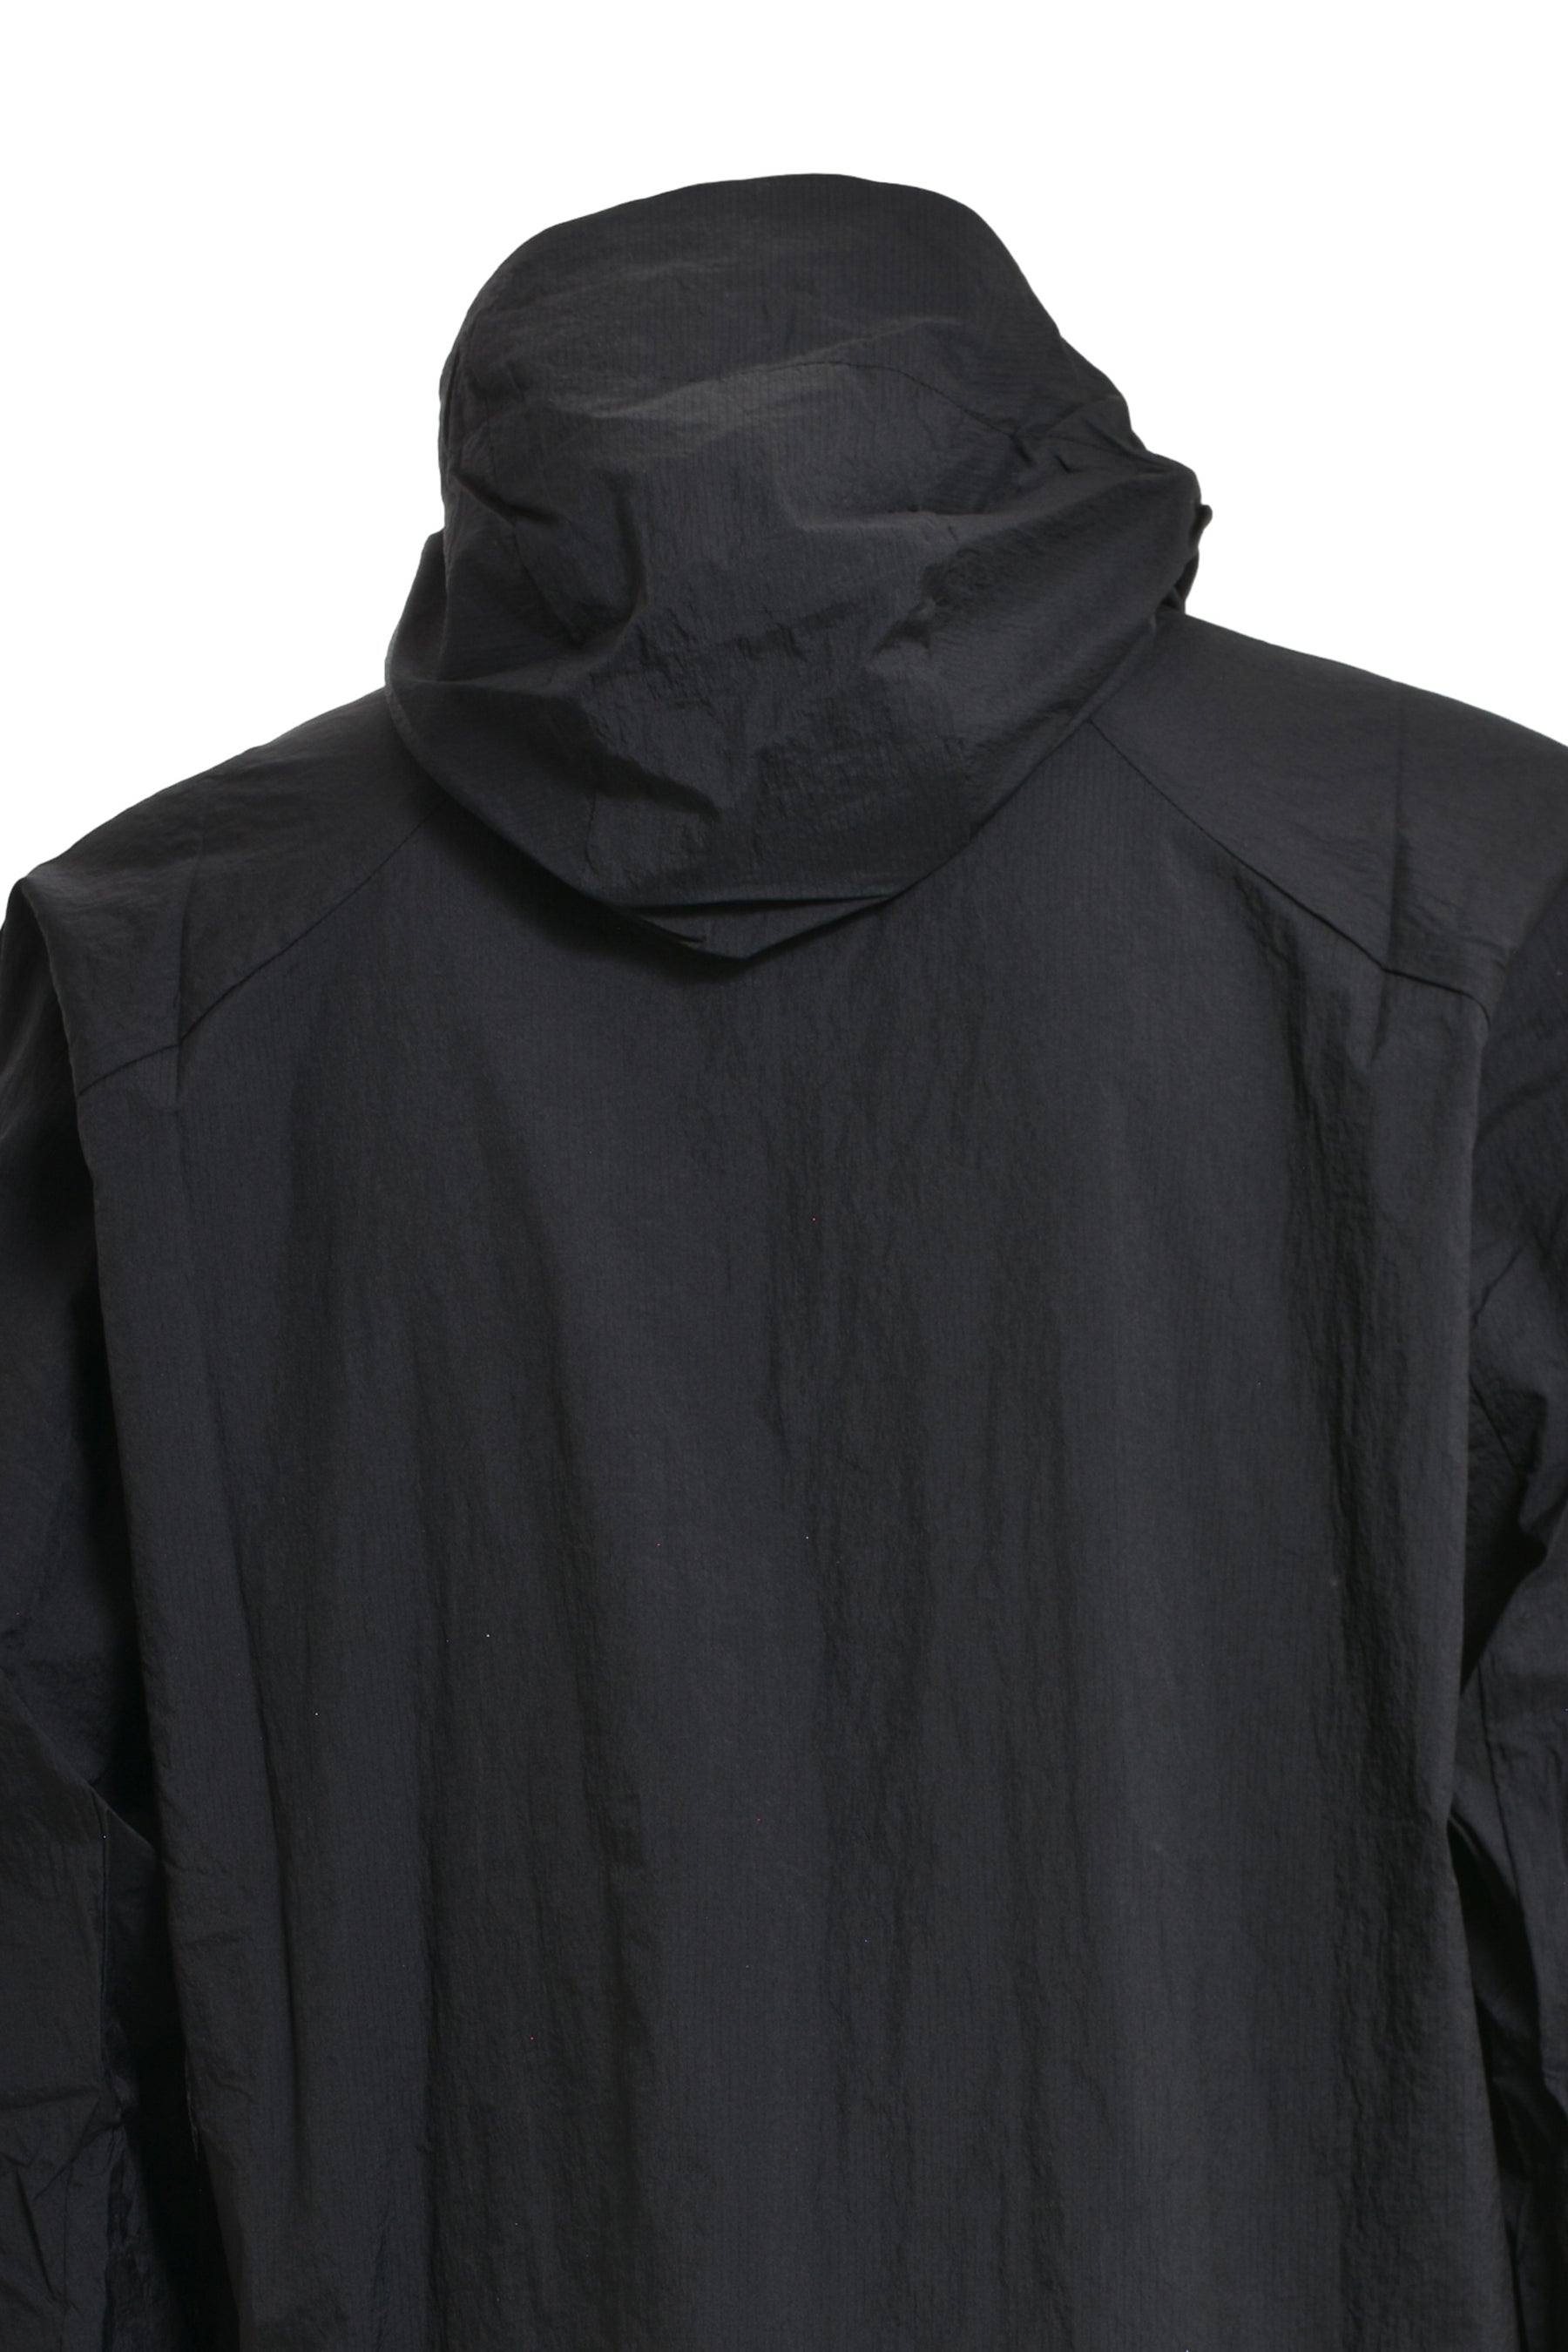 POST ARCHIVE FACTION (PAF) 5.1 TECHNICAL JACKET RIGHT / BLK